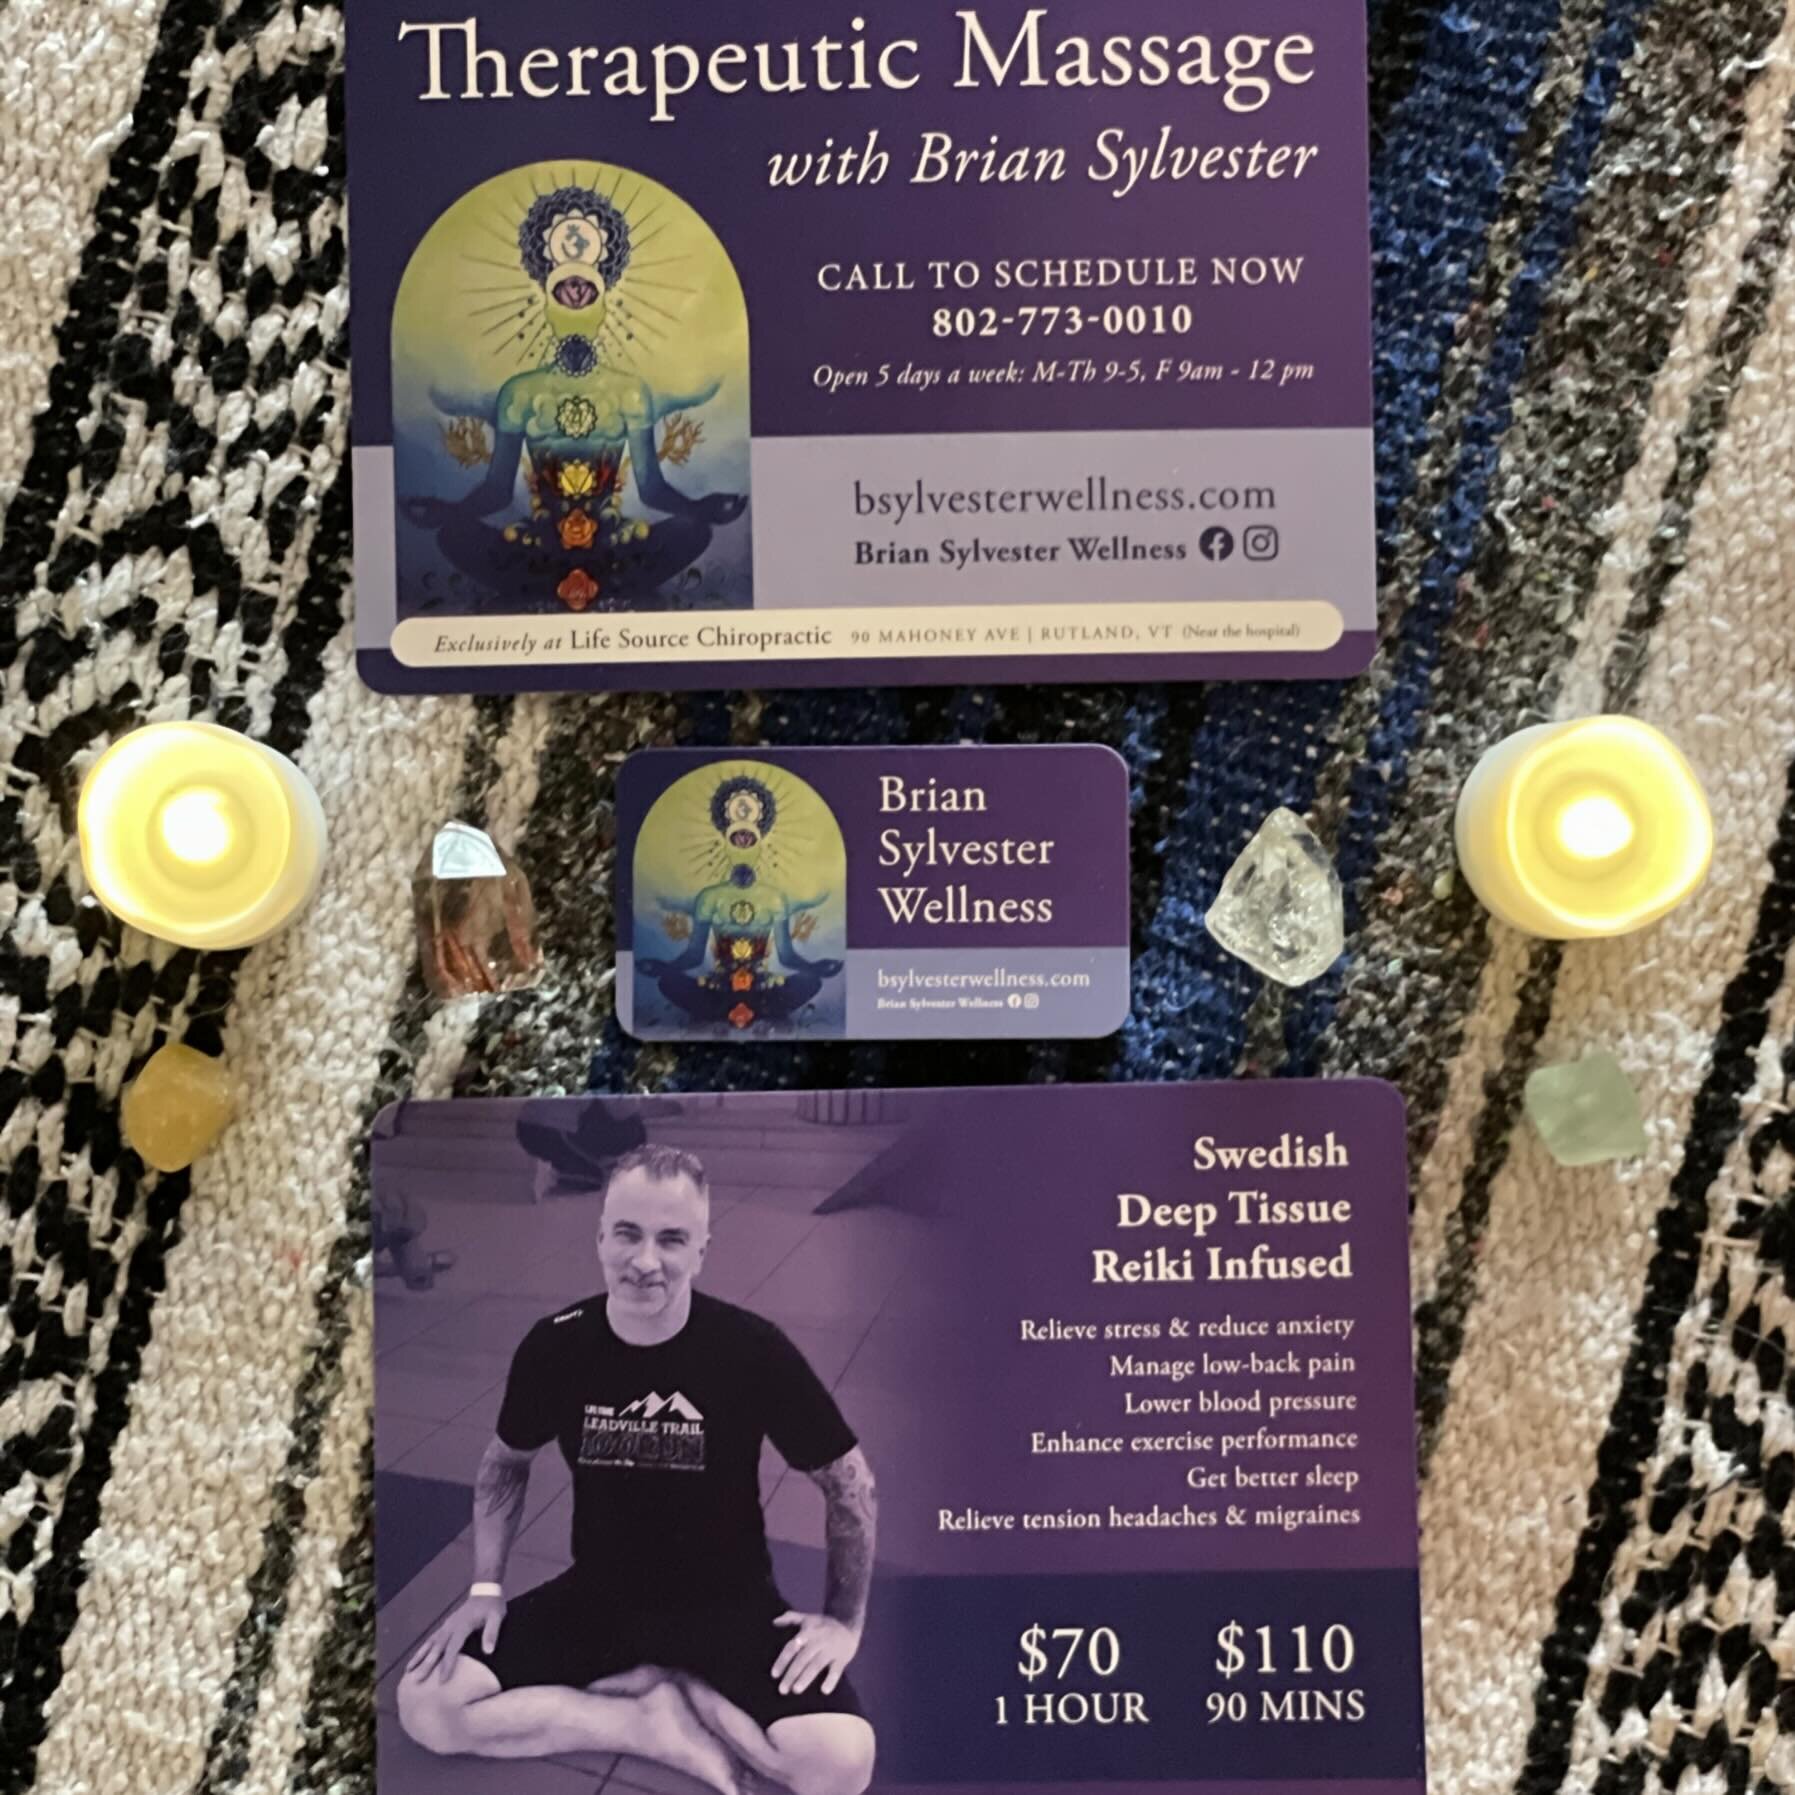 Call now to schedule:
802-773-0010
Located conveniently near the hospital in Rutland at Life Source Chiropractic. #massage #wellness #rutlandvt